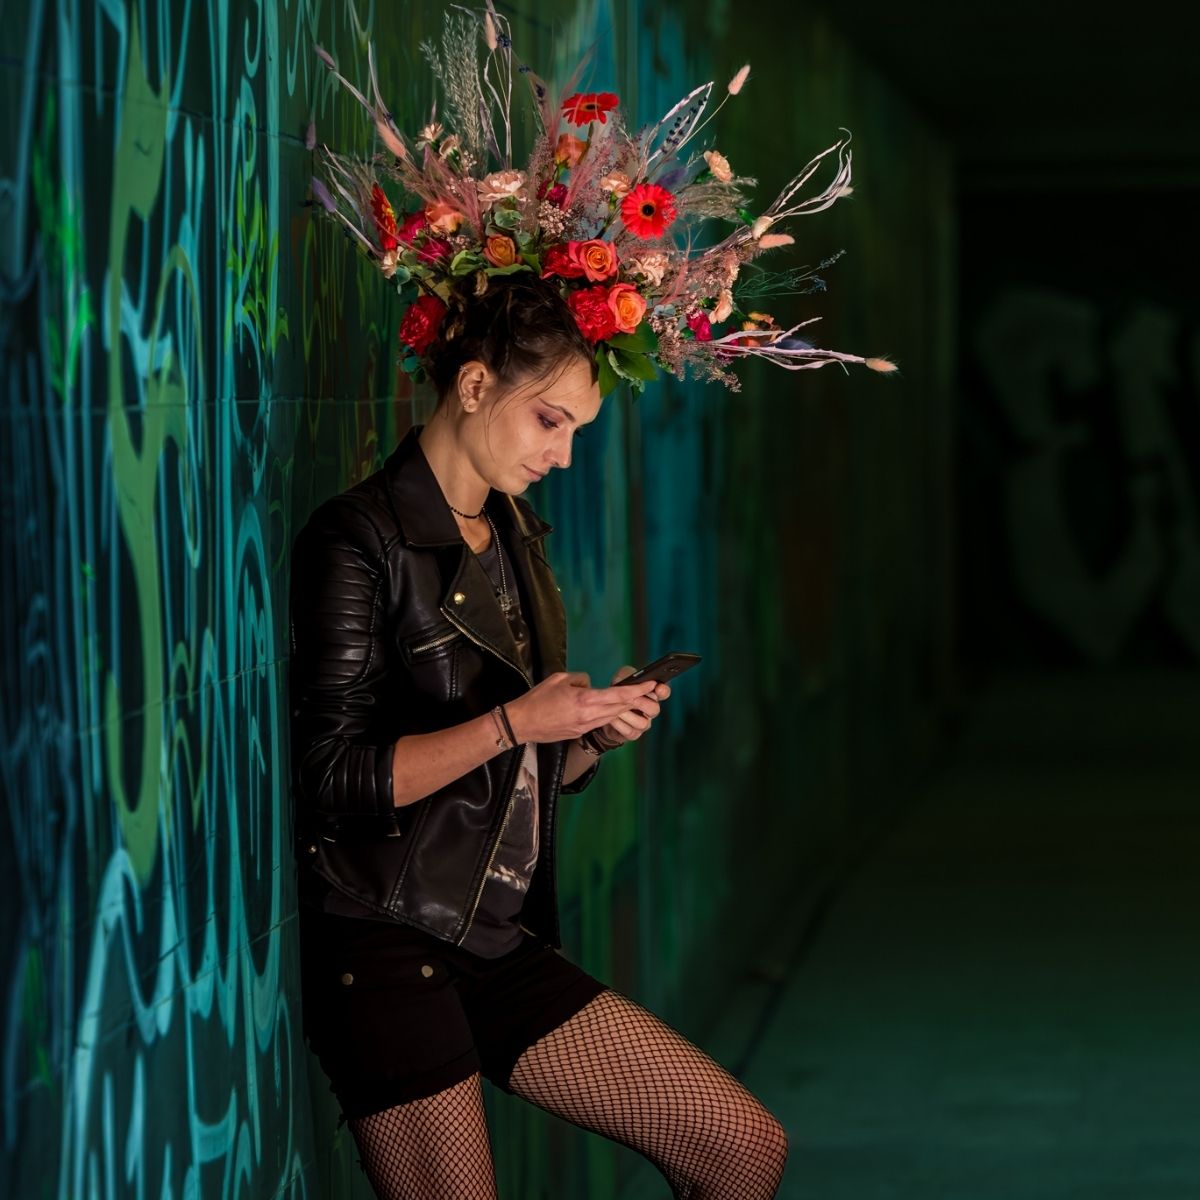 flower-punk-down-under-in-a-parking-garage-to-create-things-like-this-gives-energy-featured